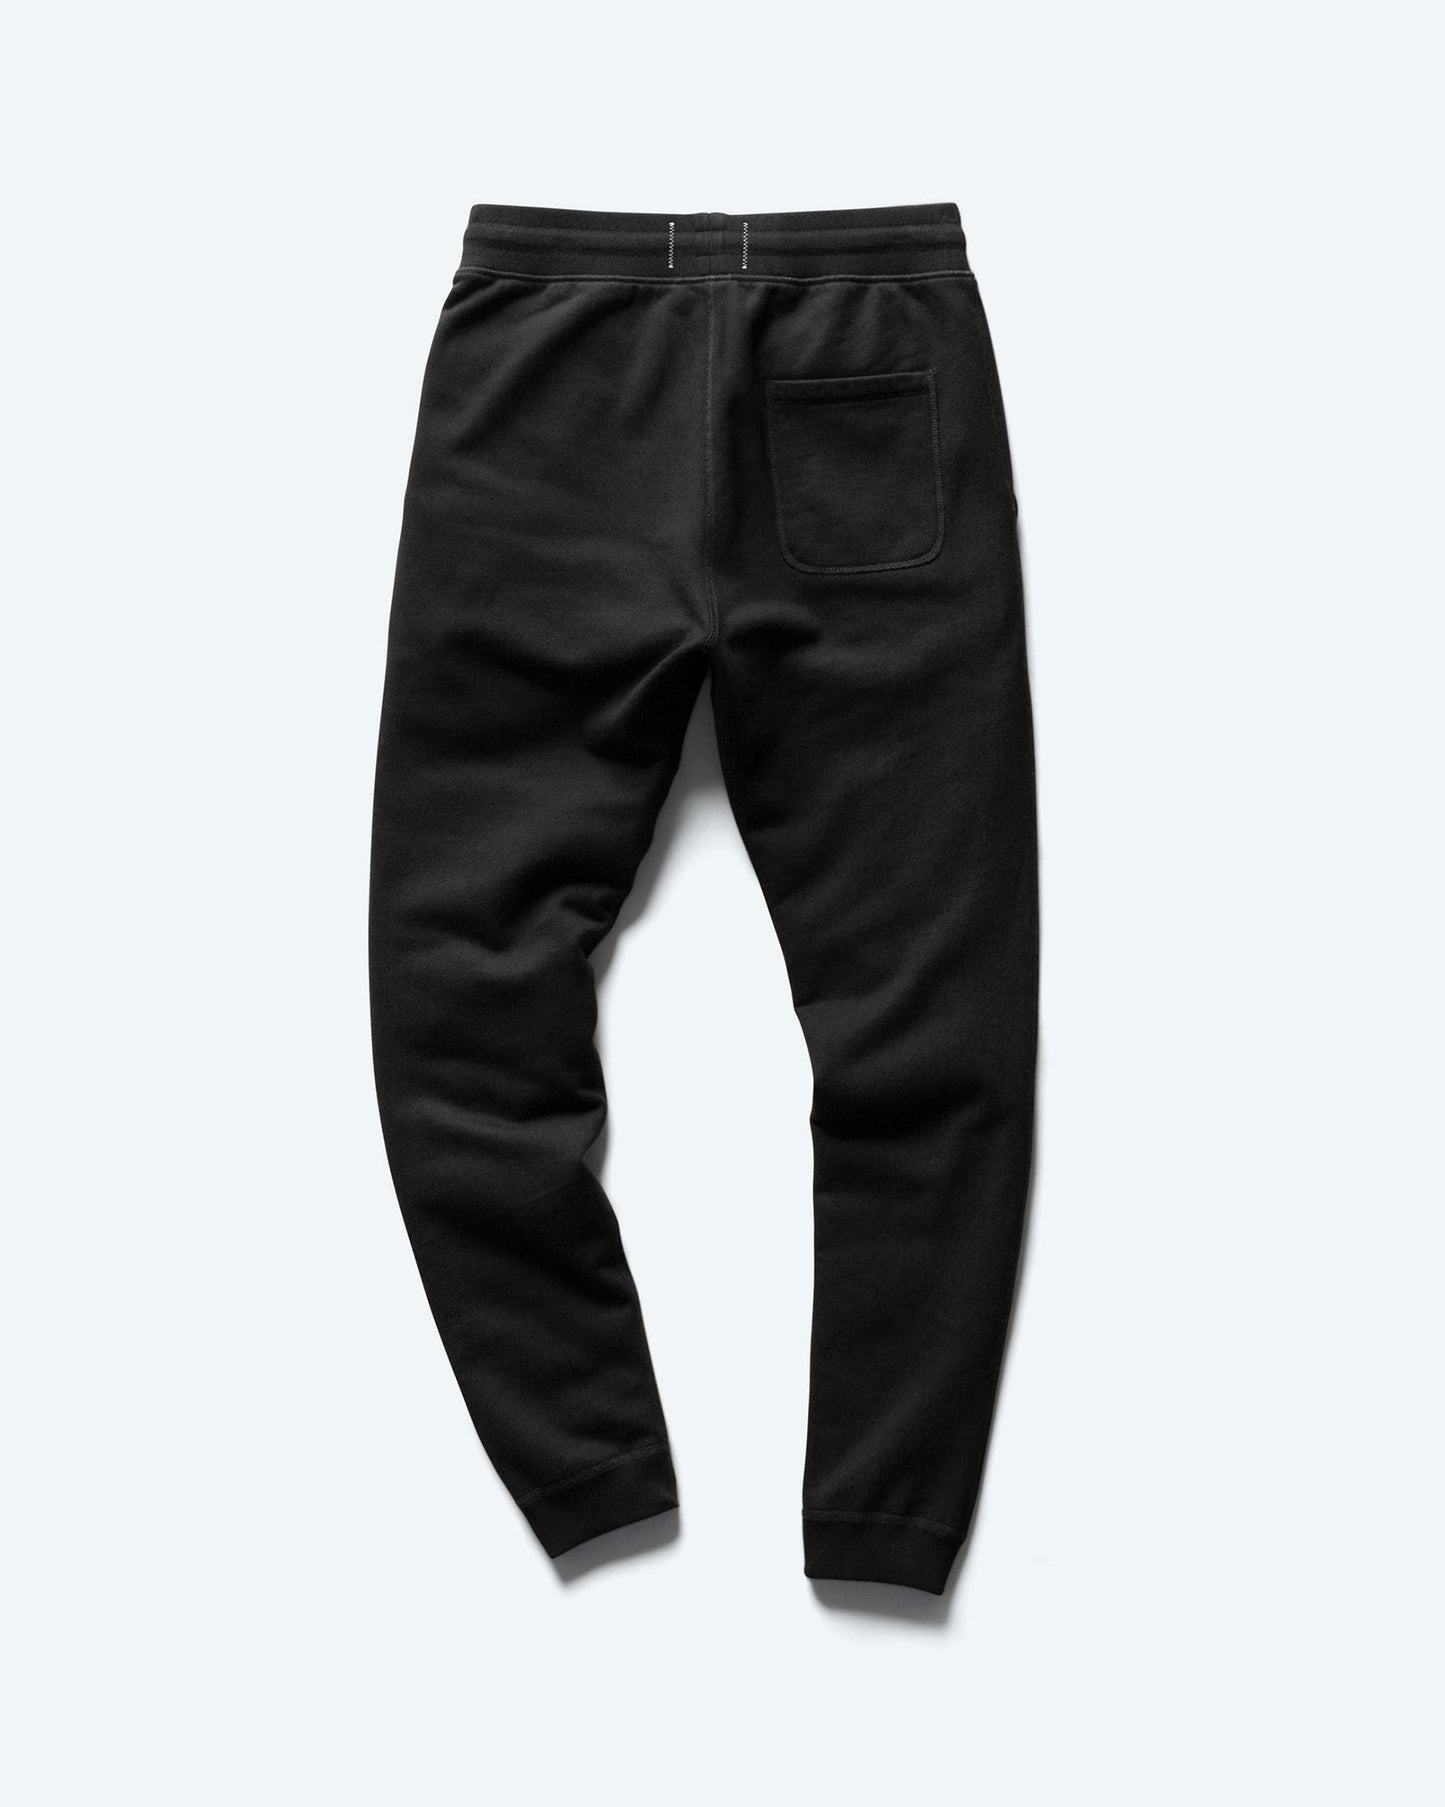 Buy STOP Black Solid Terry Rayon Slim Fit Mens Trousers